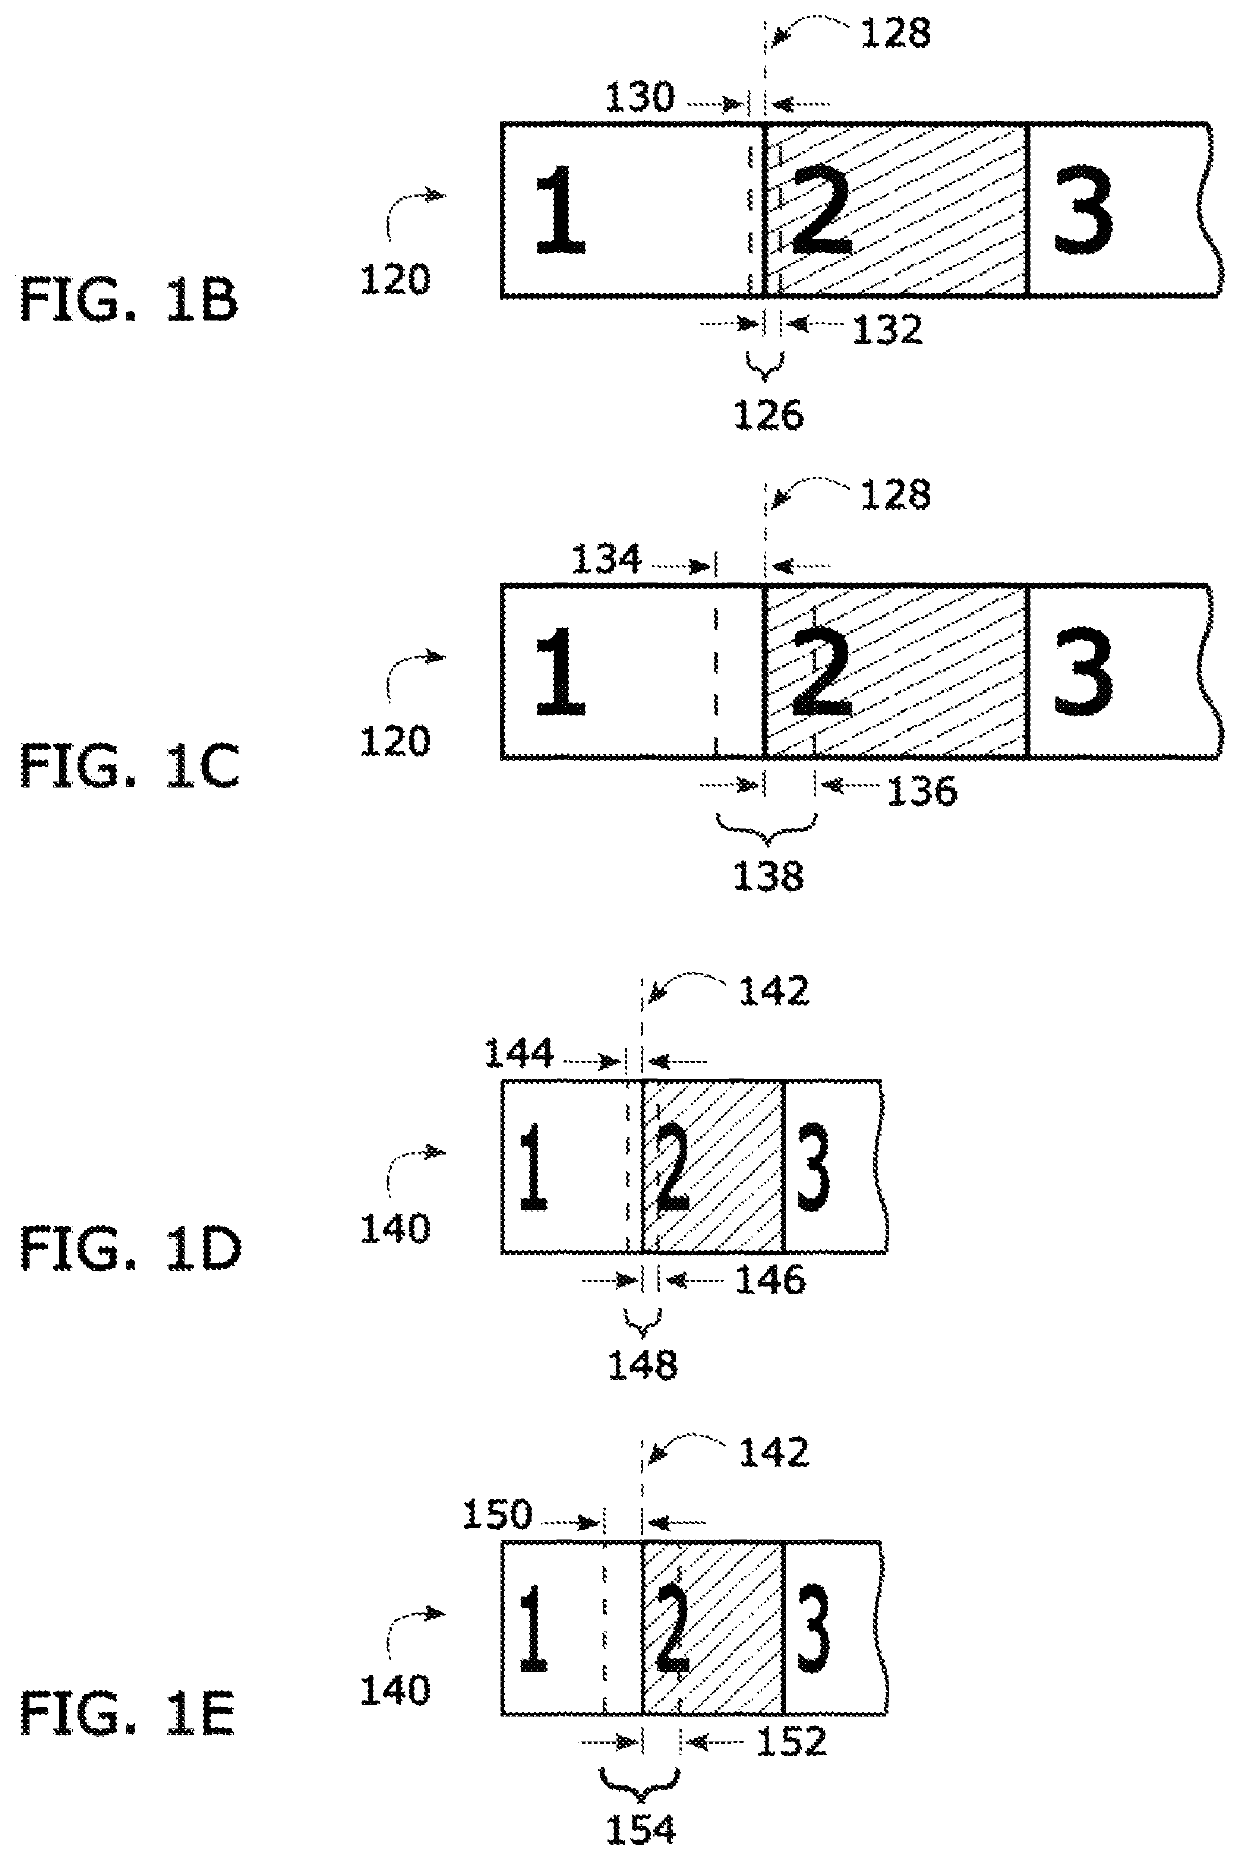 System and method for recording, as a single cinematic sequence of frames, images of a scene illuminated with two different lighting schemes by timing alternate actuation of the lighting schemes within pairs of adjacent frames to minimize visual motion artifacts between images captured therein